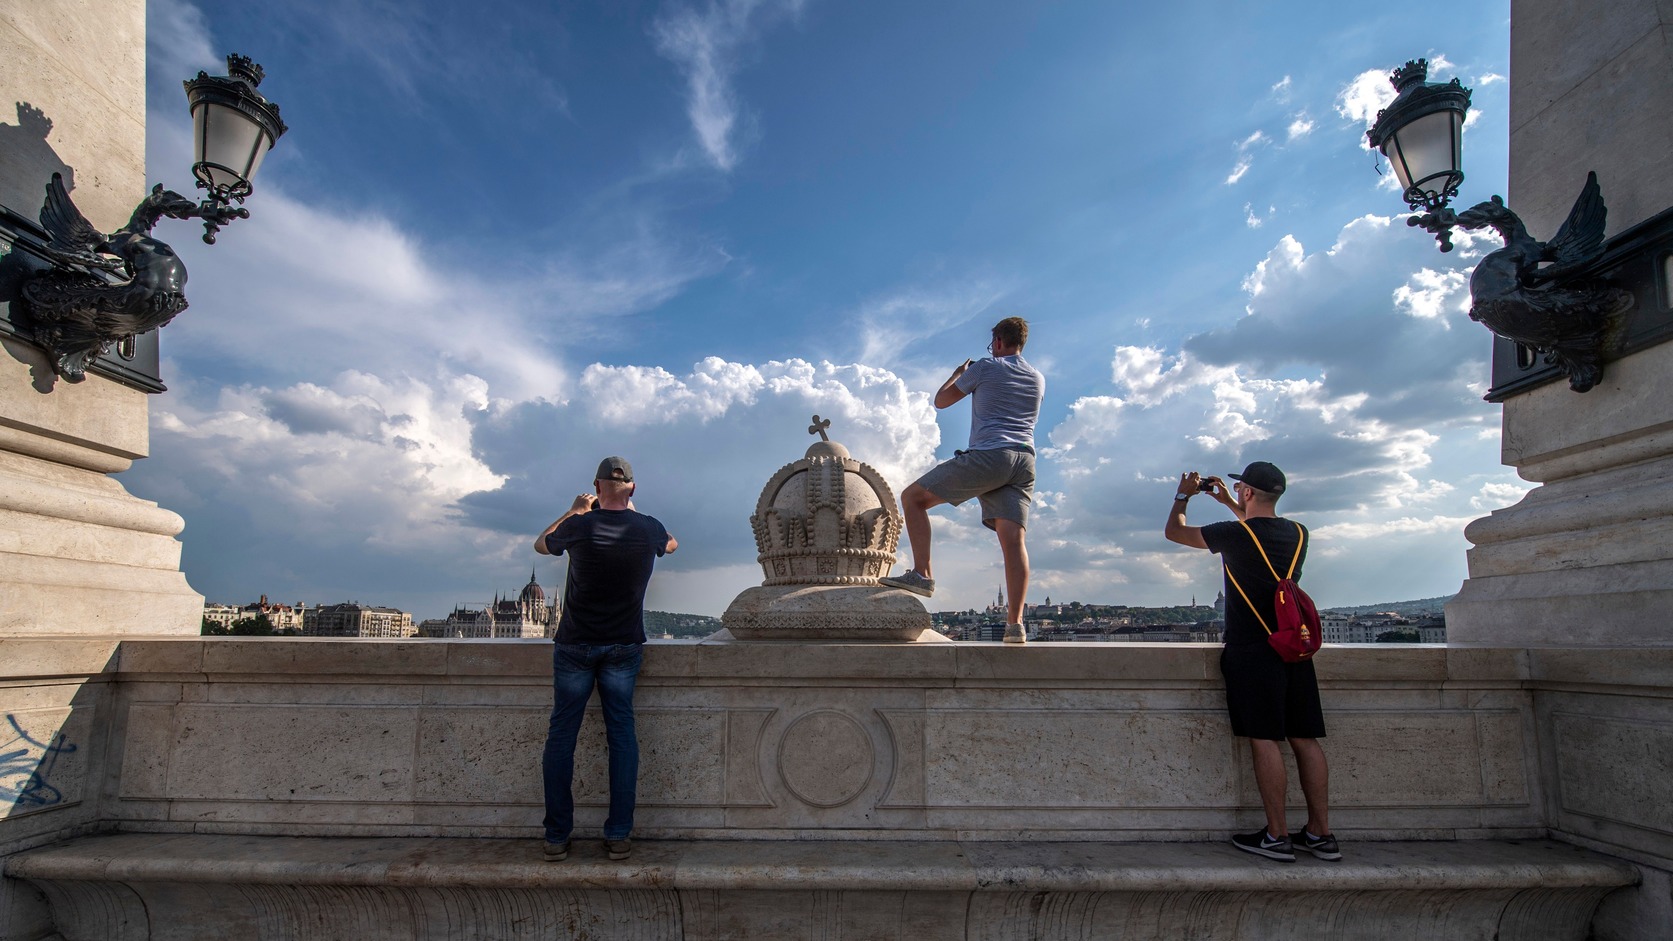 Millions More Tourists May Soon Come to Hungary, New Report by Top Consultancy Reveals